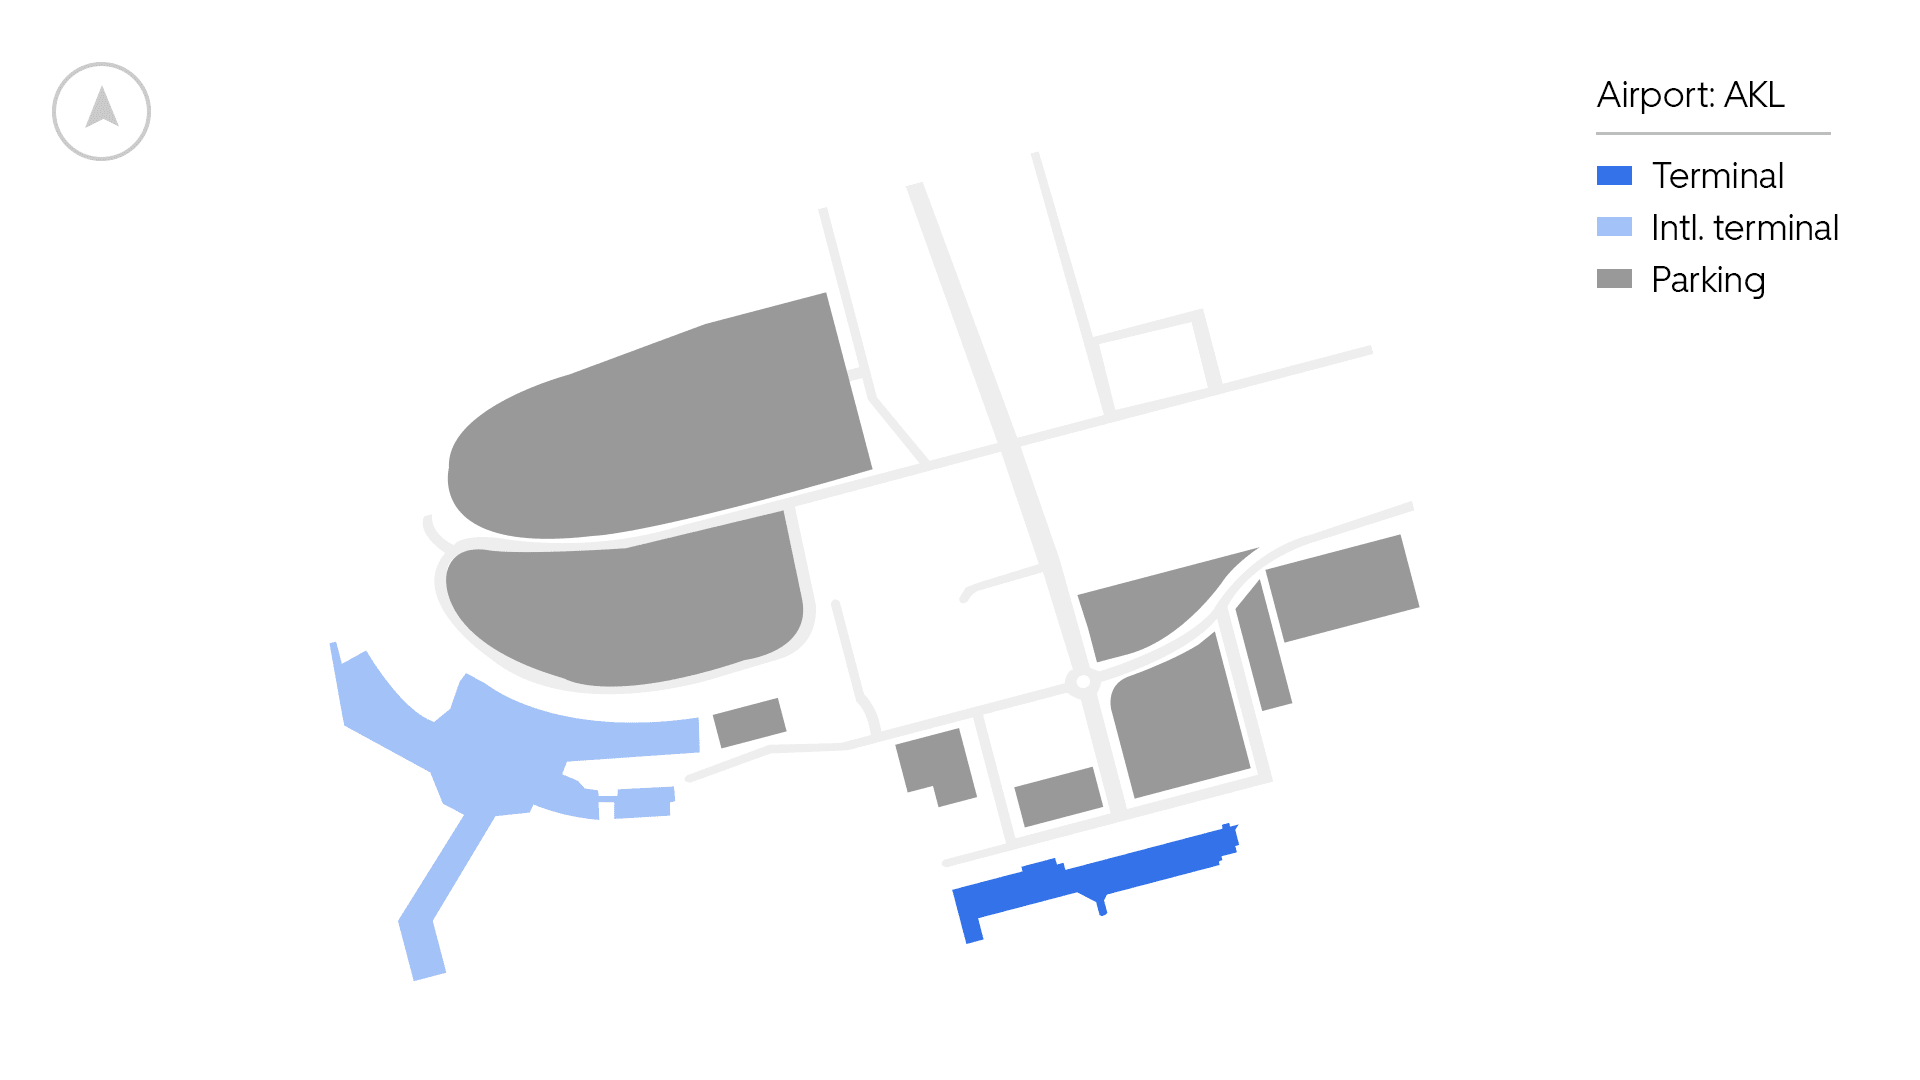 Auckland Airport map